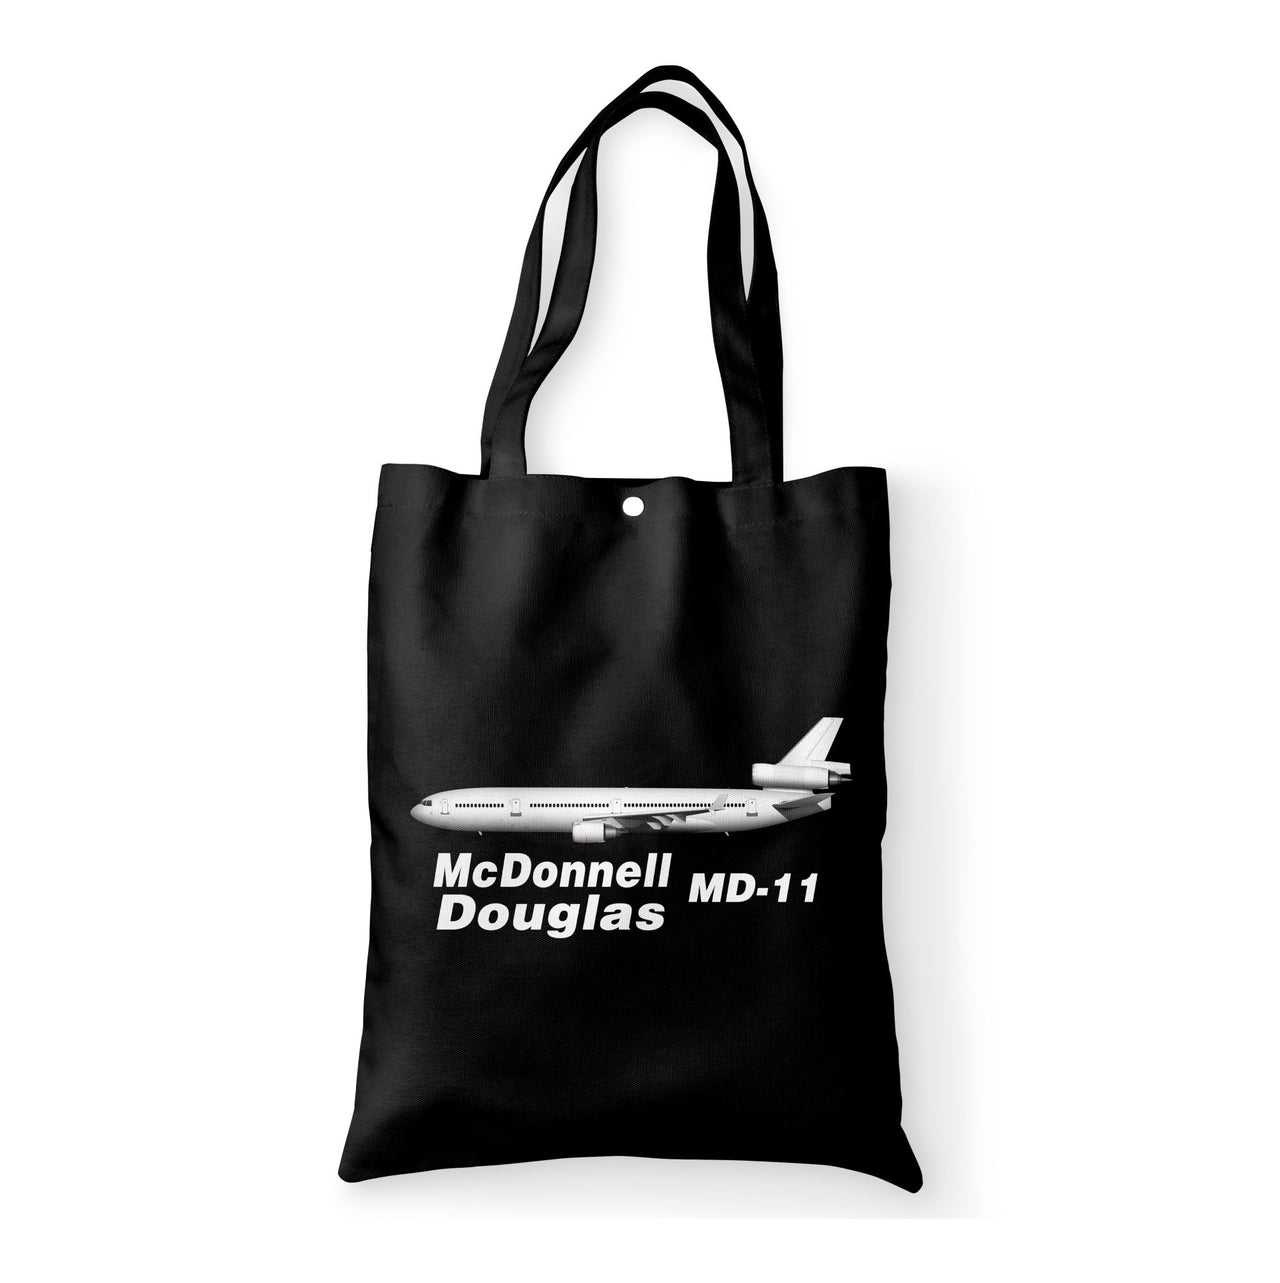 The McDonnell Douglas MD-11 Designed Tote Bags